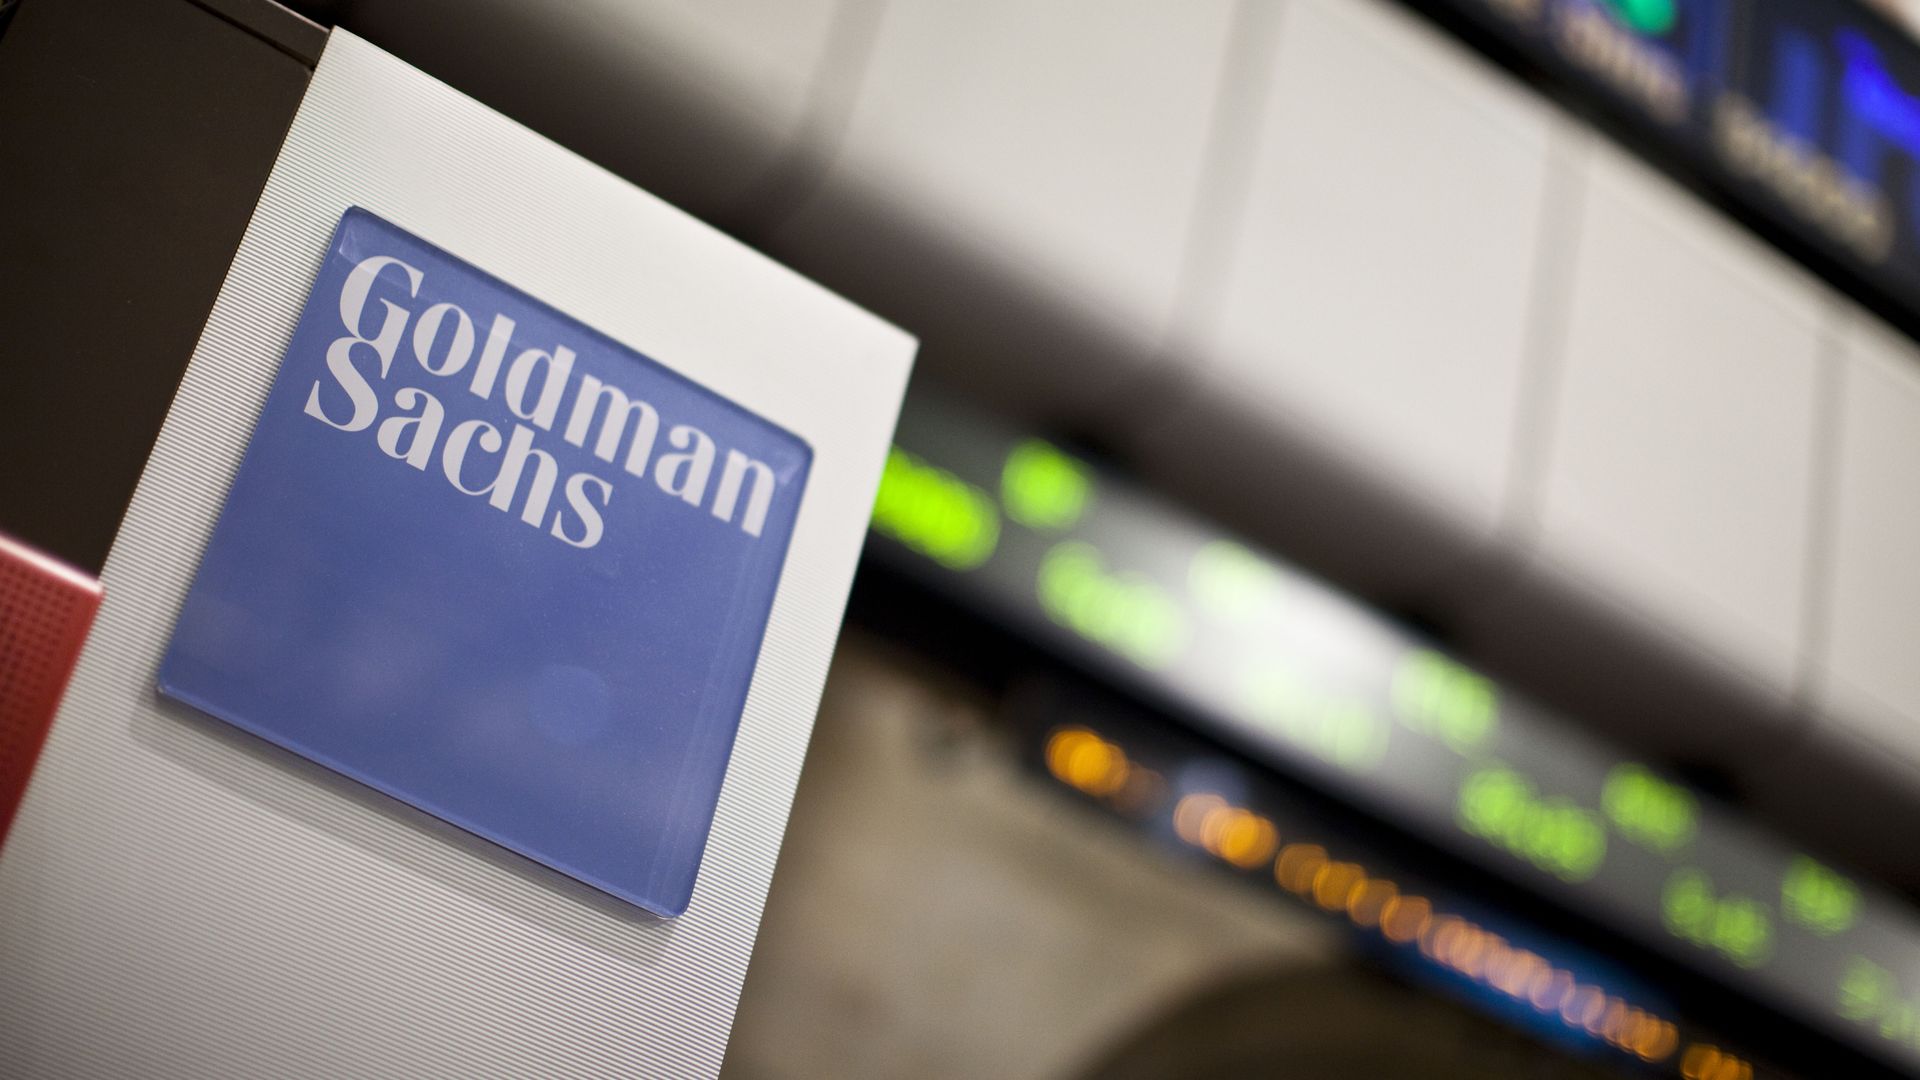 Goldman Sachs trading booth on the floor of the New York Stock Exchange in New York, on Thursday, January 6, 2011.